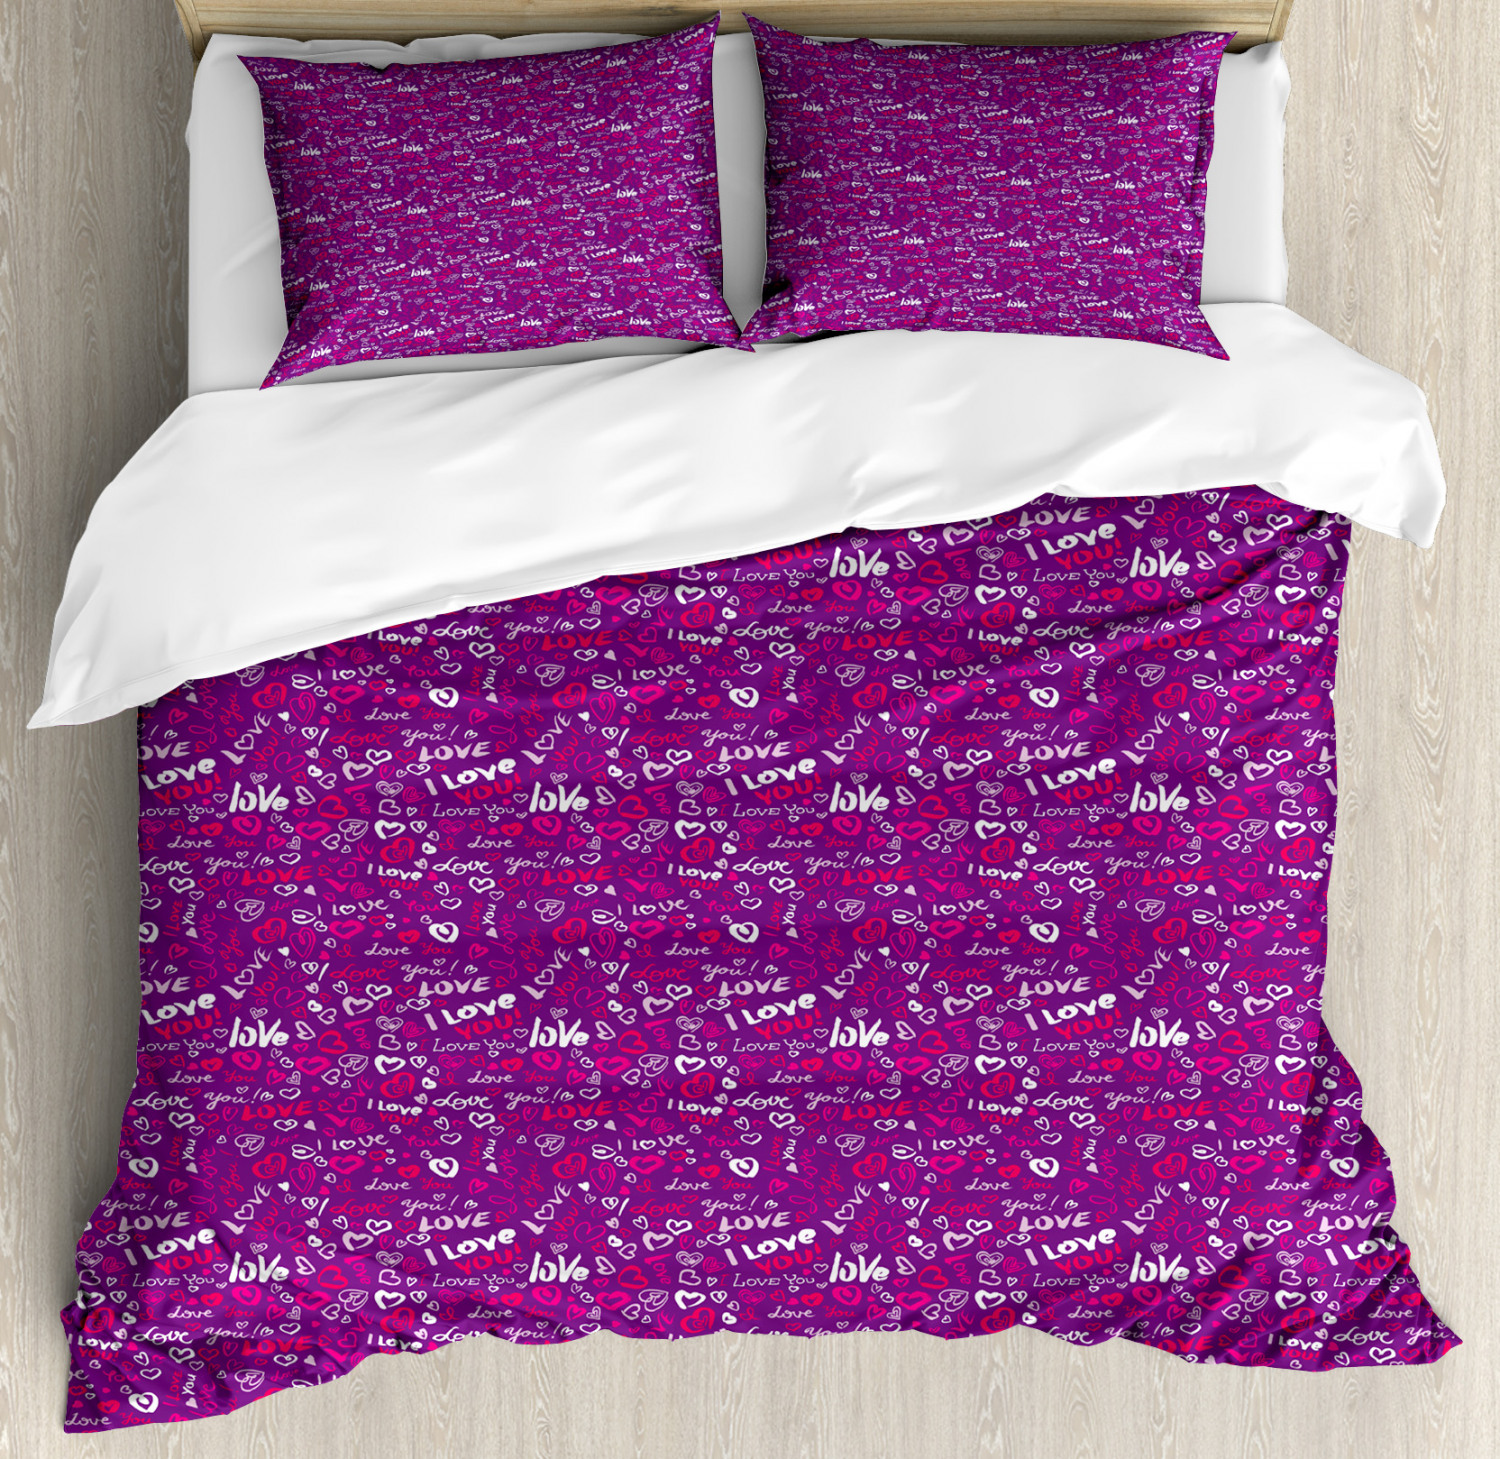 I Love You Duvet Cover Set Twin Queen King Sizes with Pillow Shams Bedding